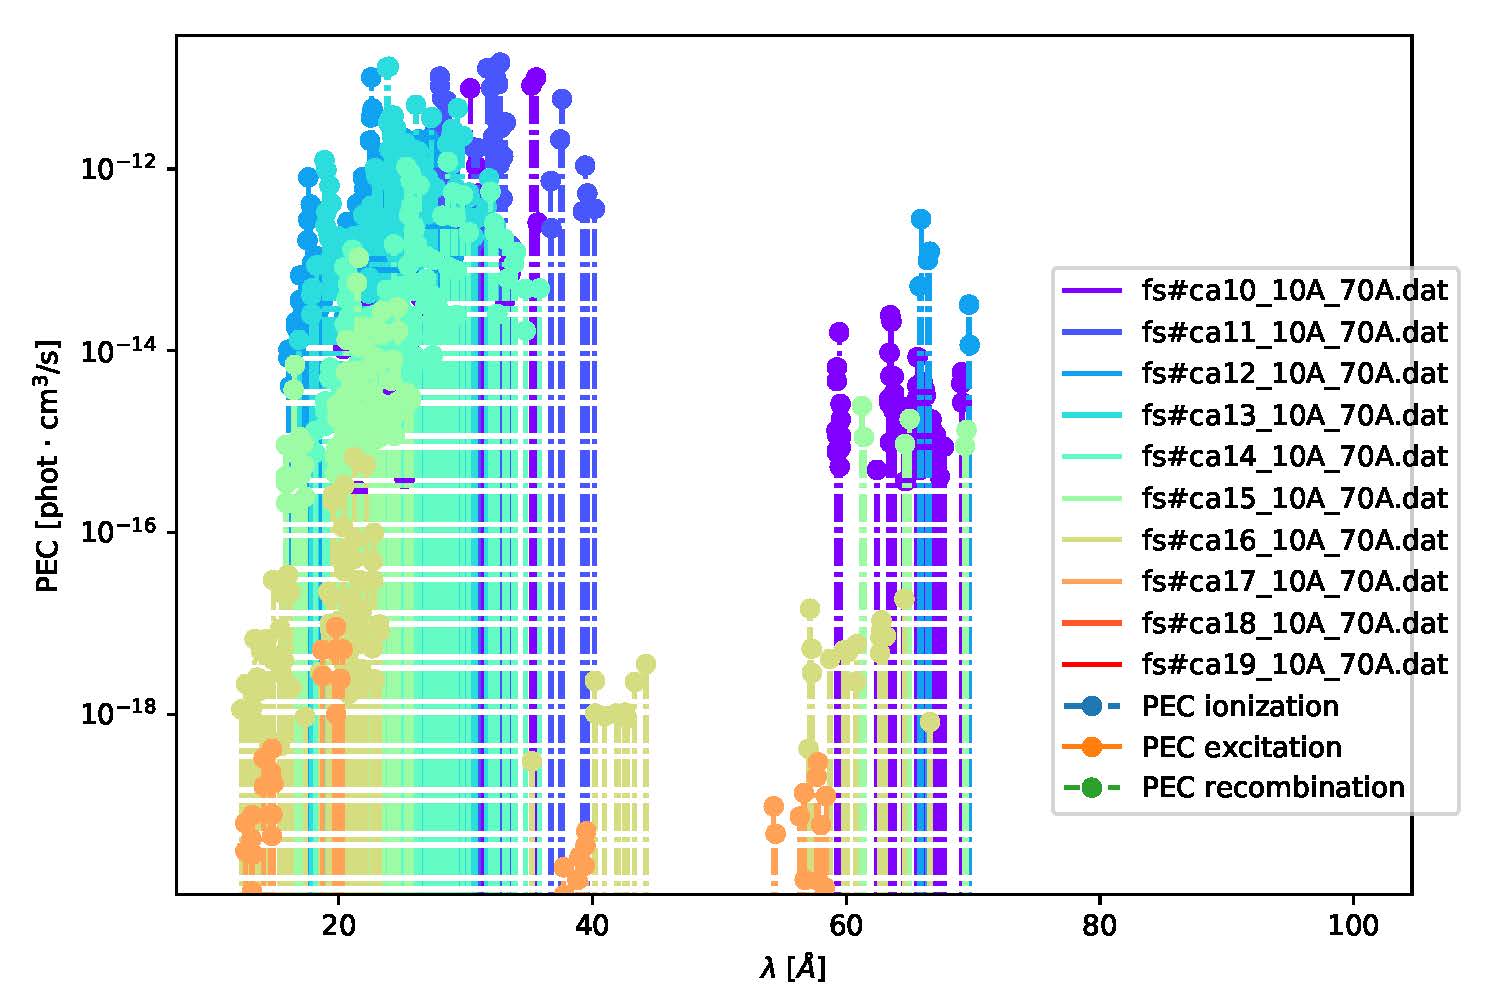 example of Ca spectrum overview combining several PEC files